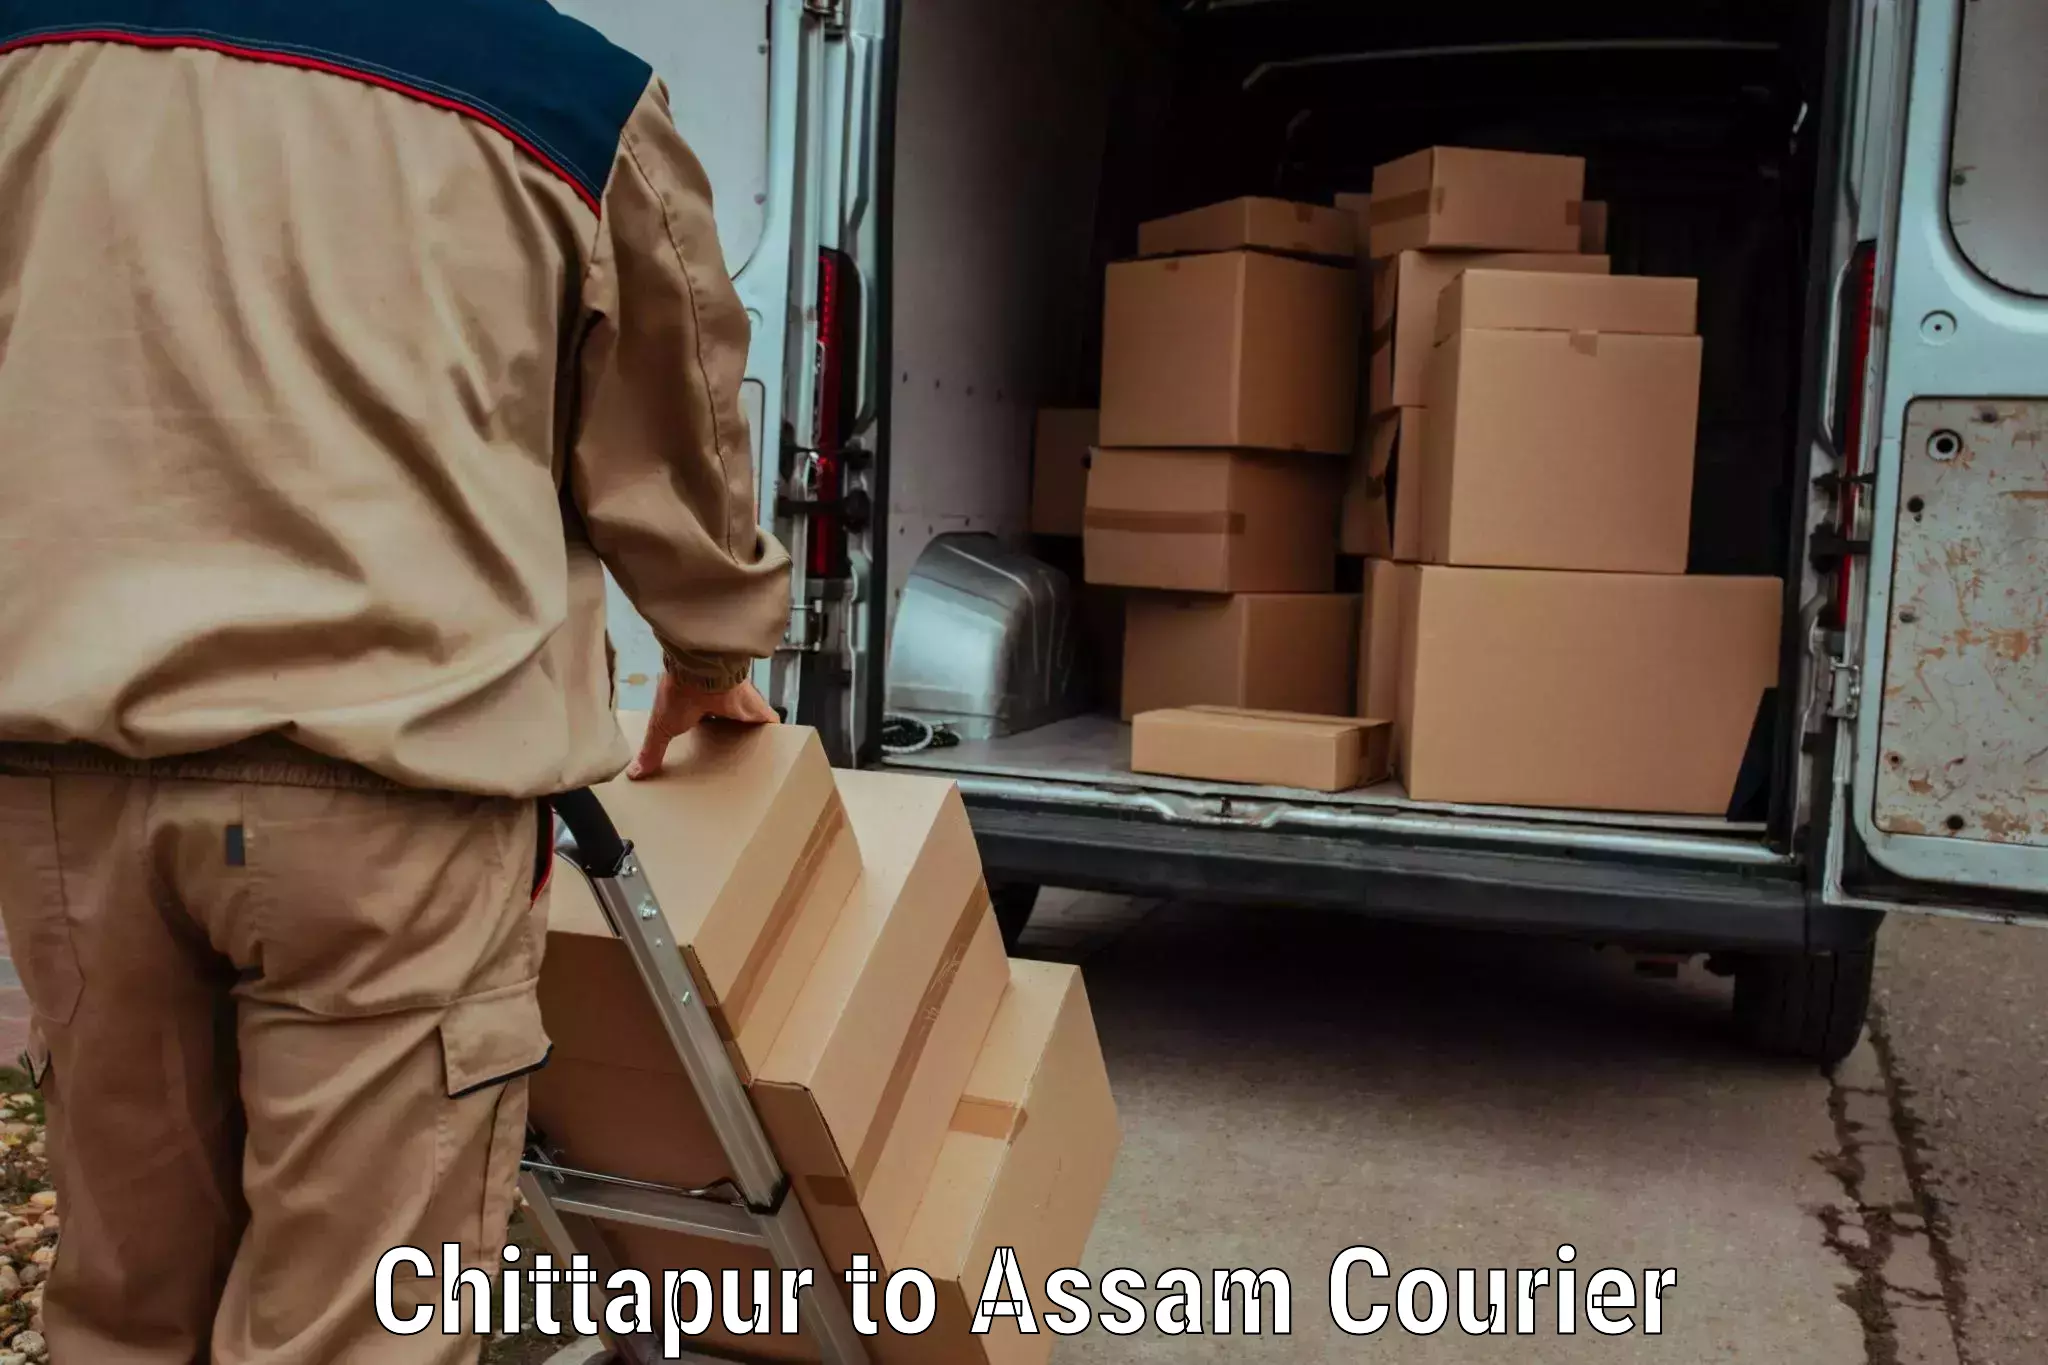 Courier service booking Chittapur to Jonai